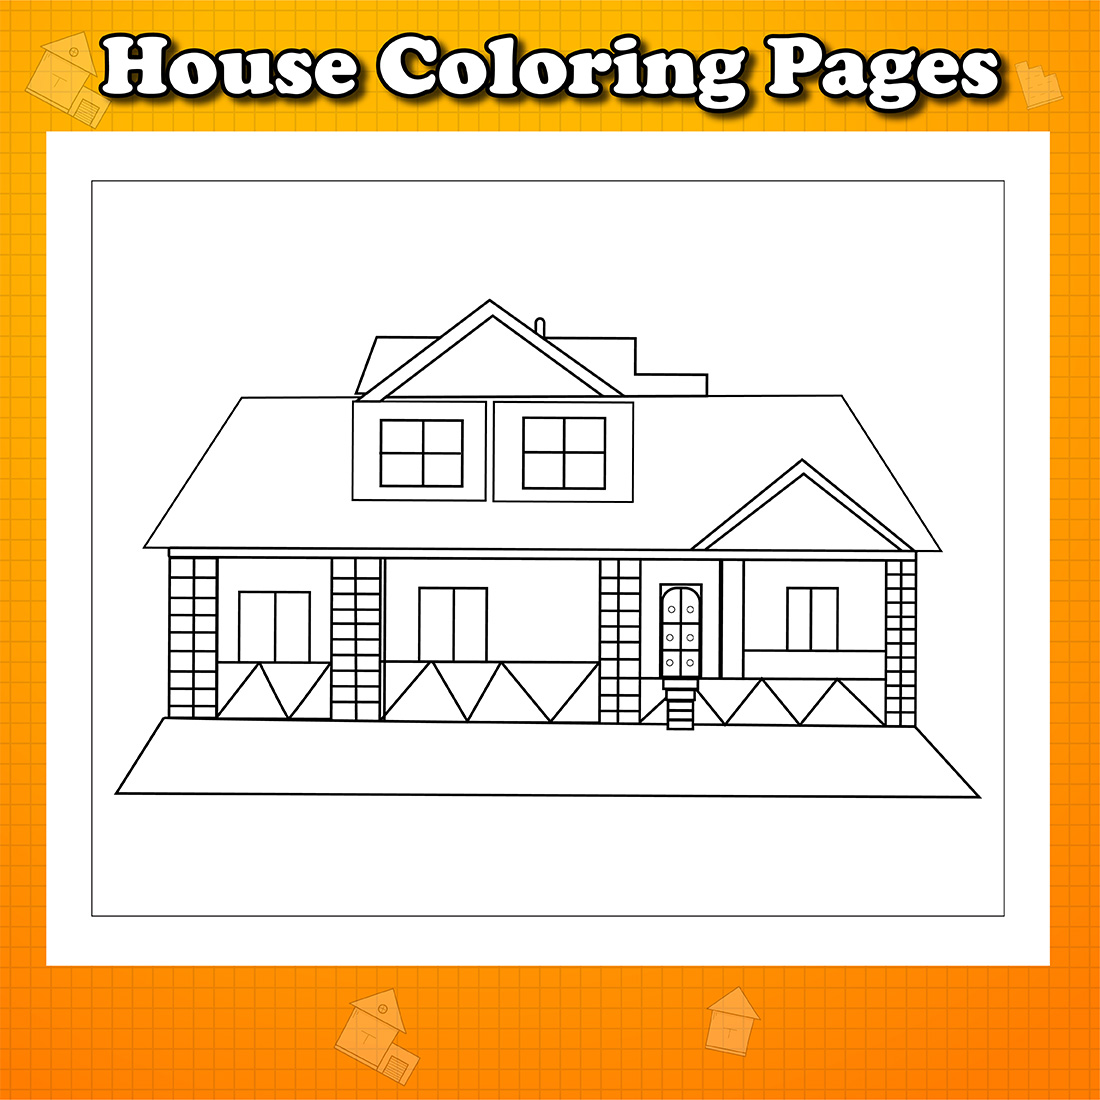 preview image House Coloring Pages.